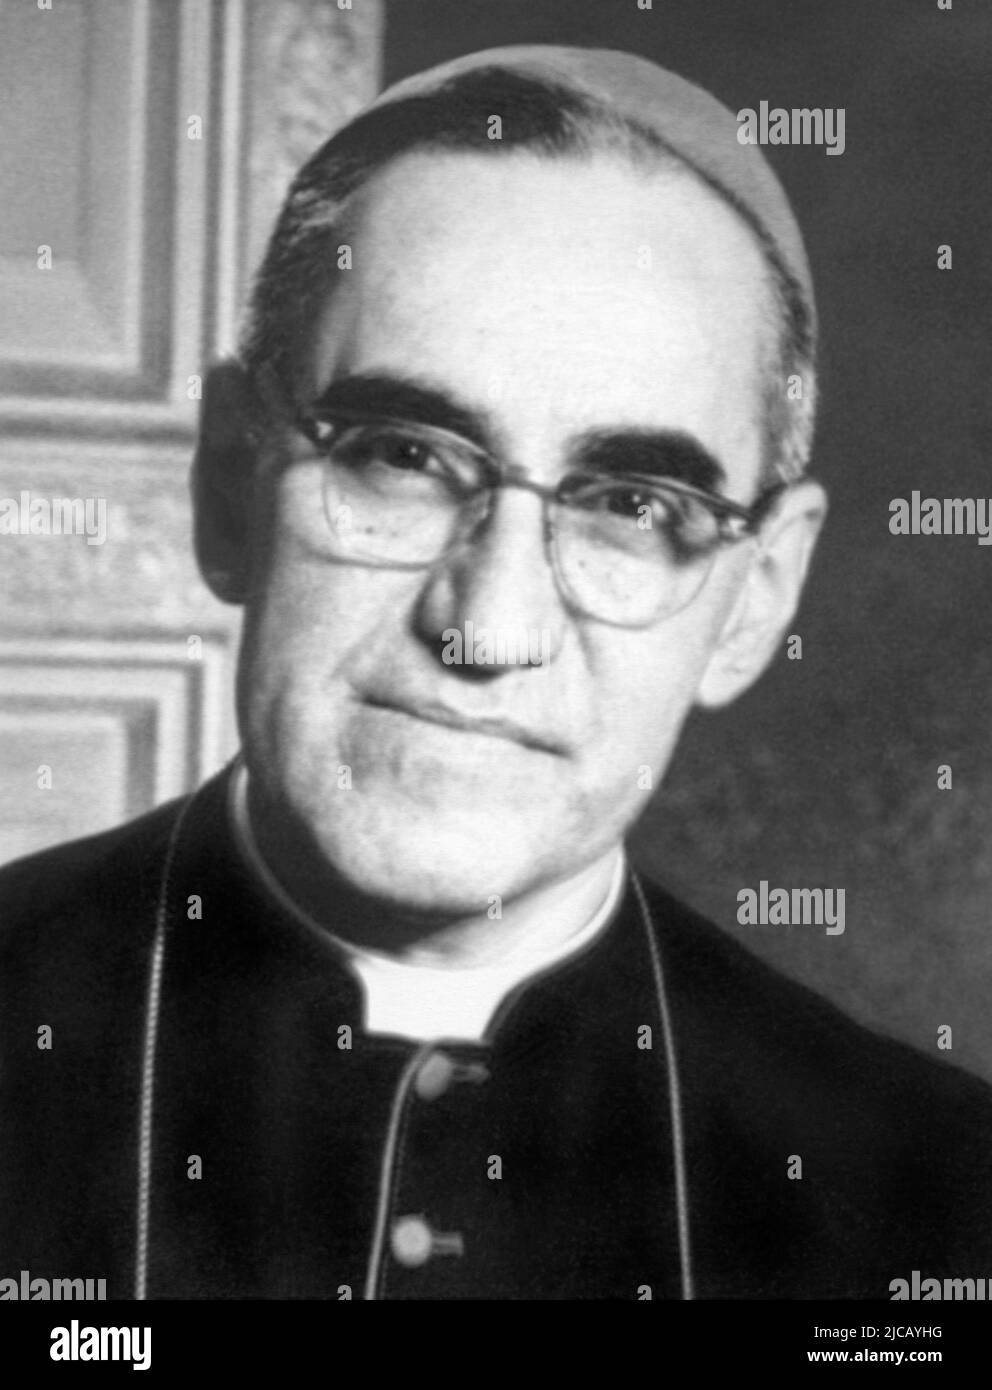 Óscar Romero (1917-1980), Archbishop of San Salvador in El Salvador, who actively denounced violations of the human rights of the most vulnerable and defended the principles of protecting lives, promoting human dignity, and opposing all forms of violence. Romero was murdered, during a mass, by an assassin likely on orders from a political death squad leader.  (Photo: 1978, Rome, Italy.) Stock Photo